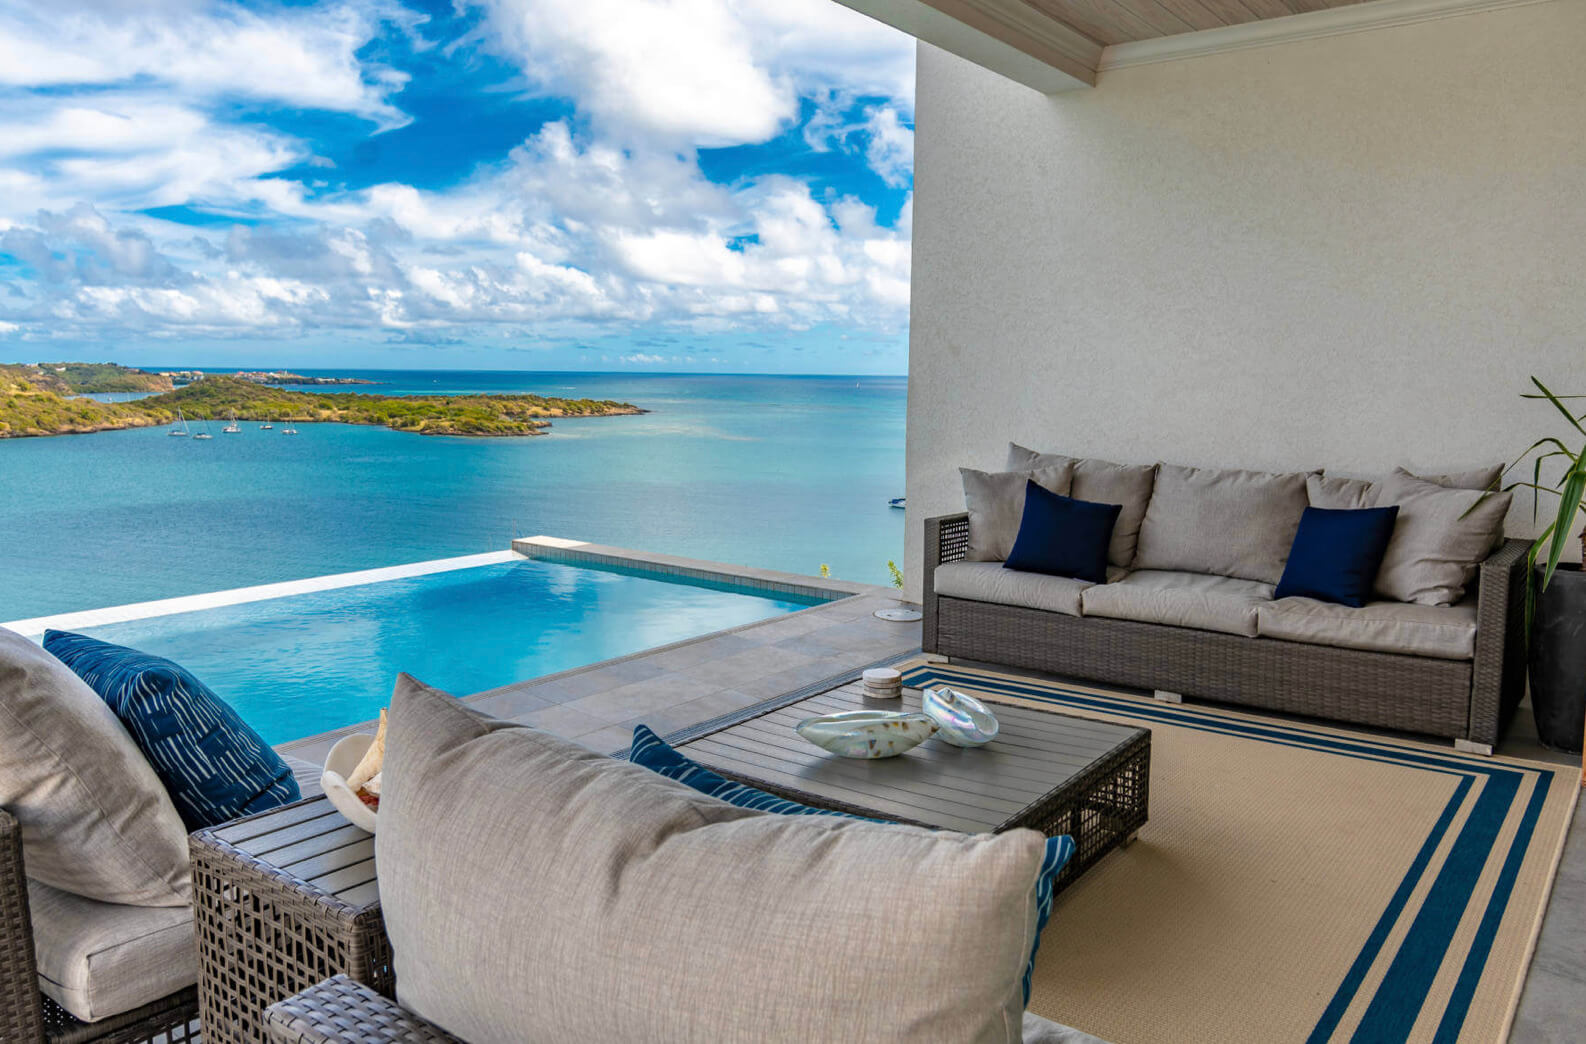 LUXURIA LIFESTYLE WELCOMES THE POINT AT PETITE CALIVIGNY, GRENADA – OWN YOUR PIECE OF PARADISE